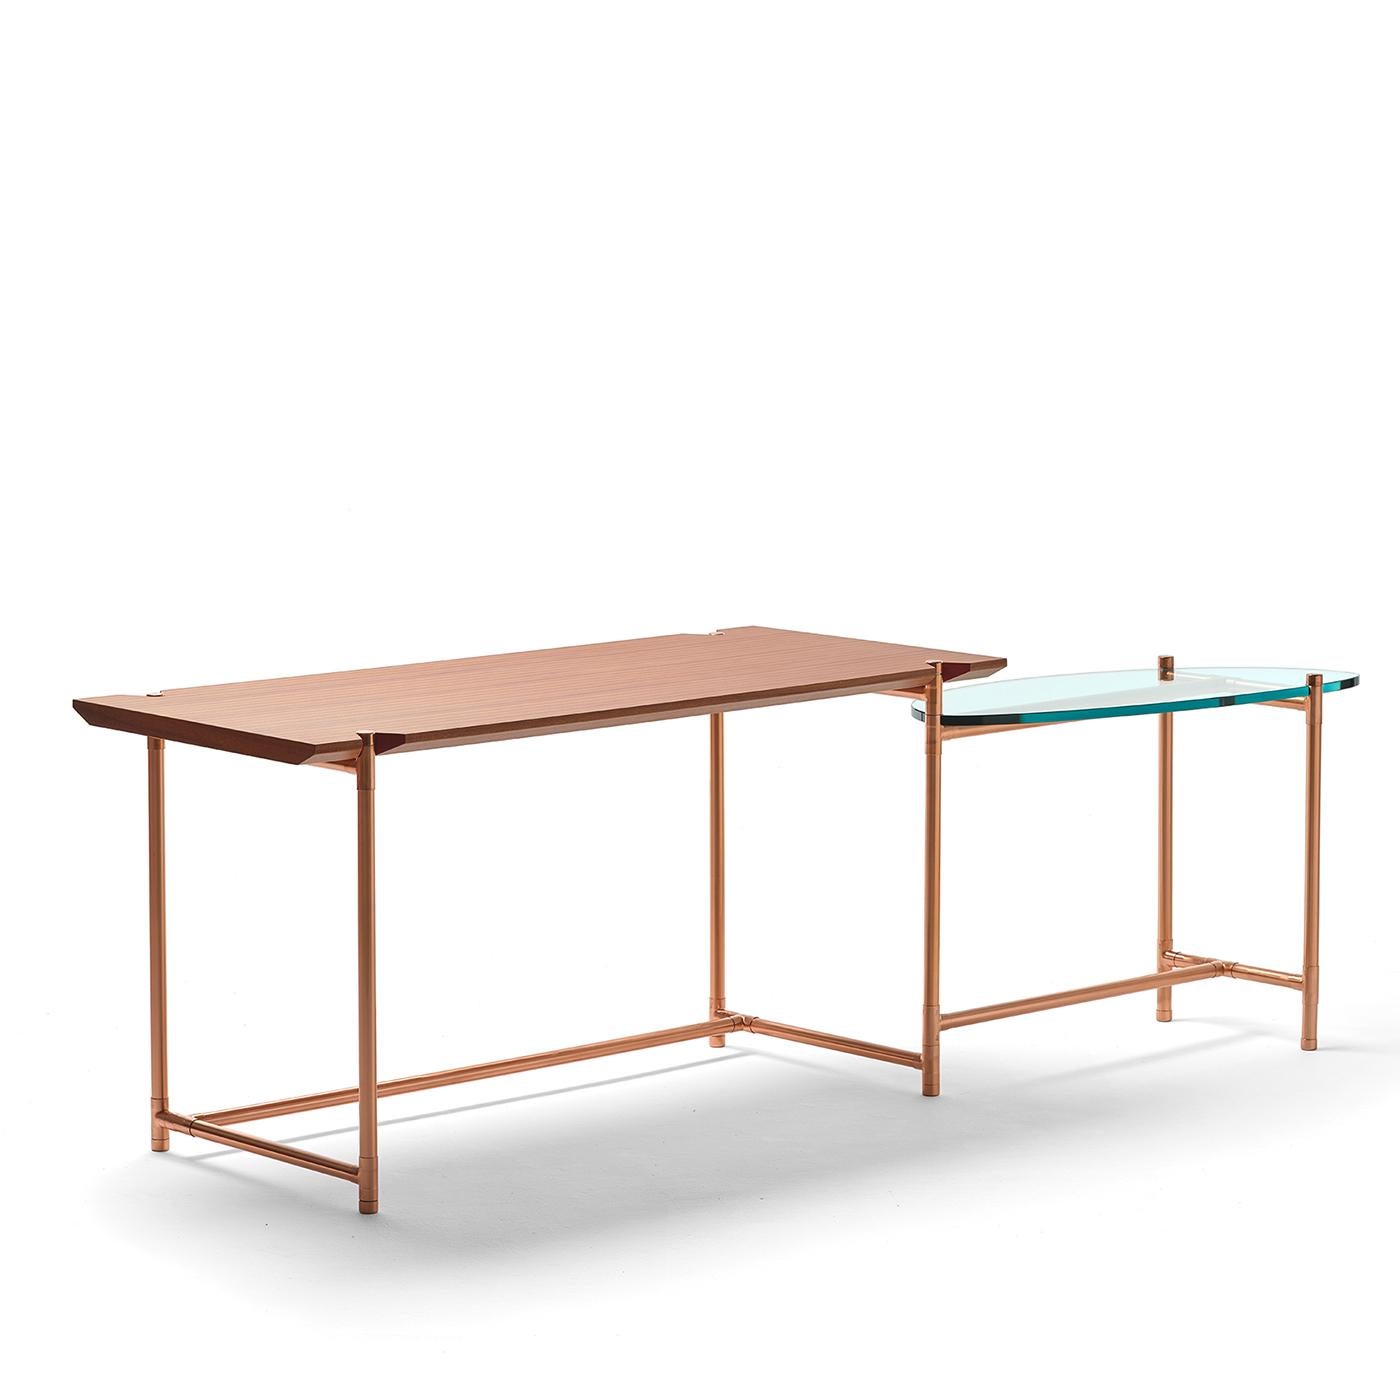 Blending lightweight and prized materials, this sleek desk will accent any modern office or study with subtle sophistication. The inner steel structure with external copper tubing supports a rectangular top in oak-veneered, medium-density fibreboard